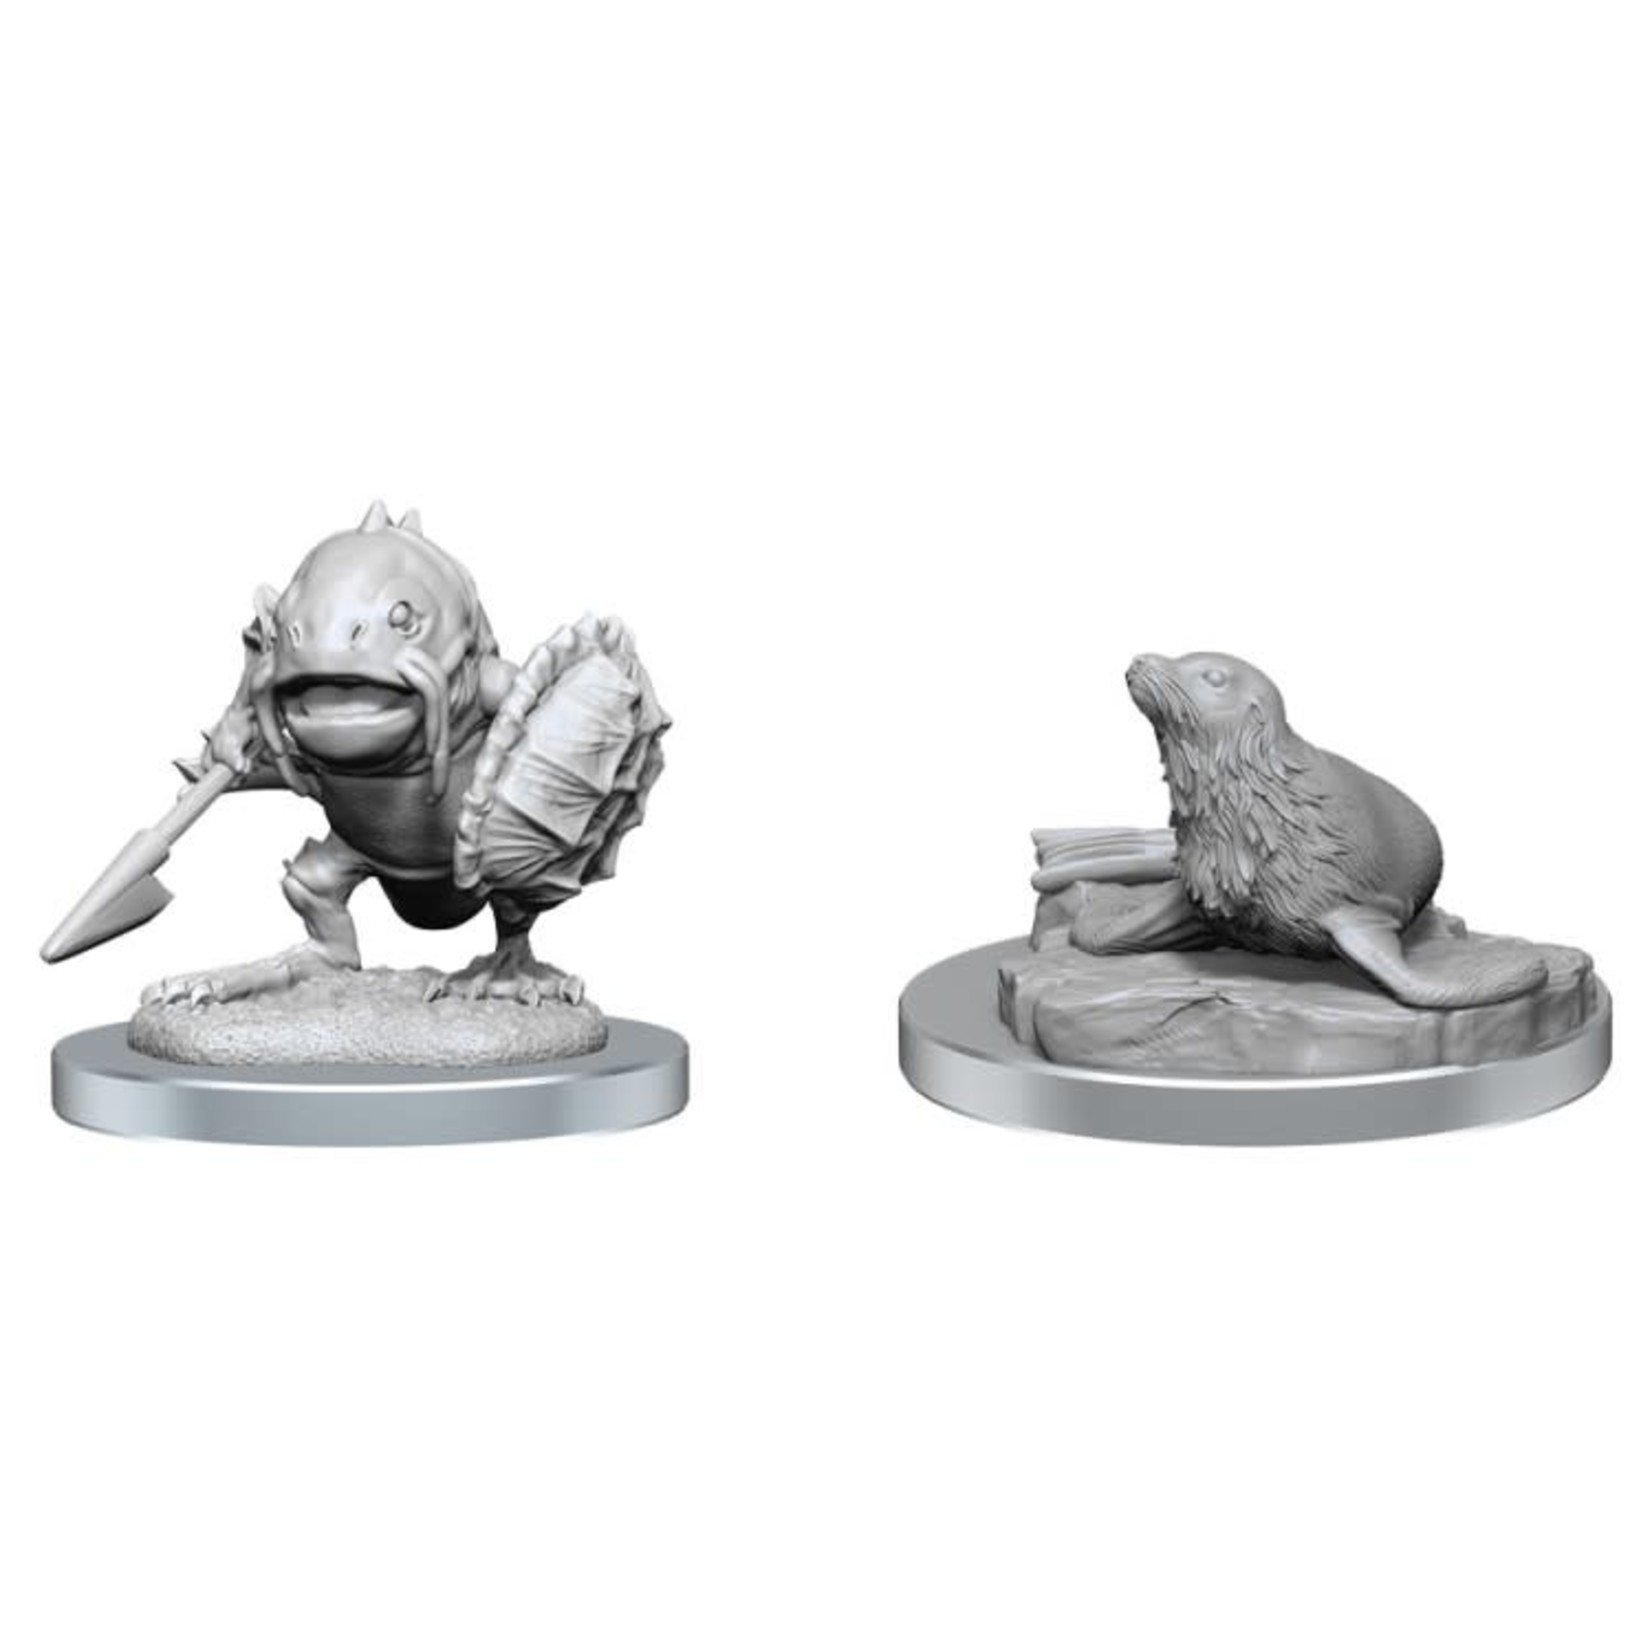 WizKids Dungeons and Dragons Nolzur's Marvelous Minis Locathah and Seal